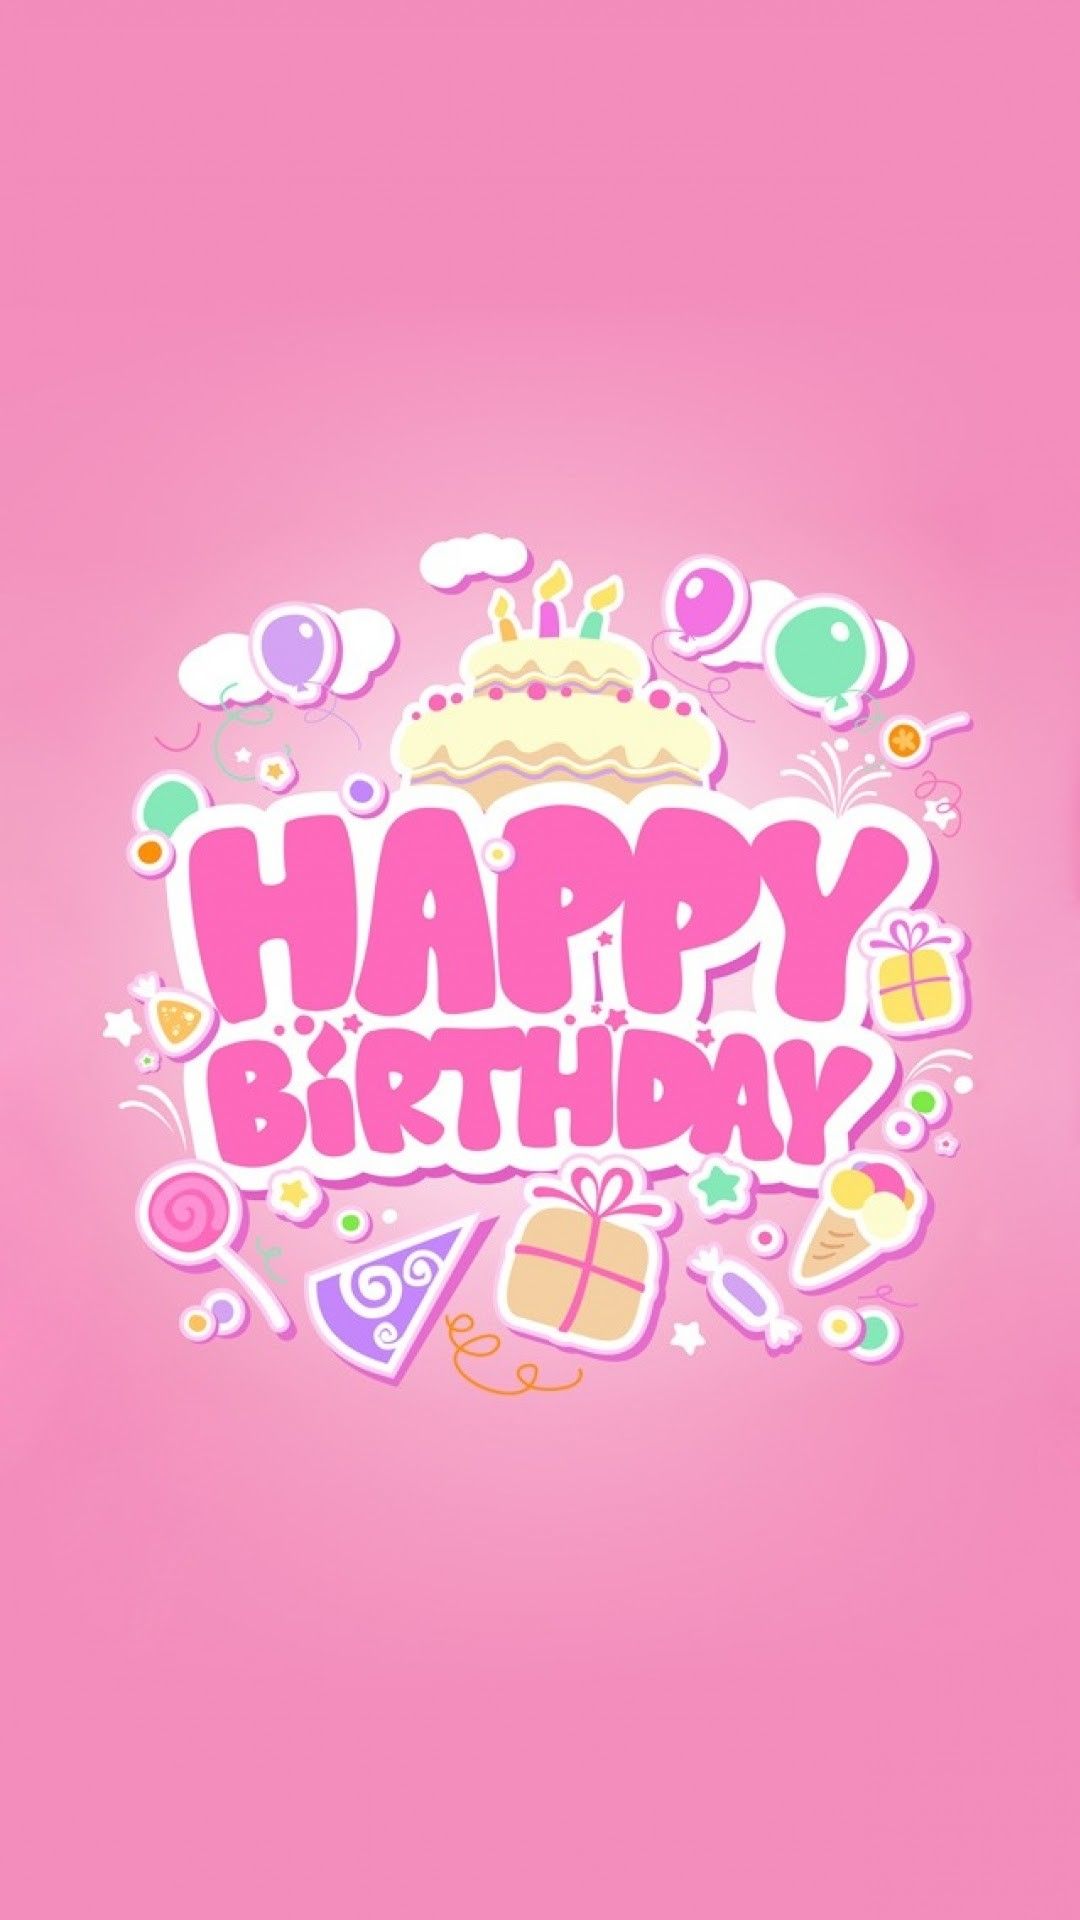 Happy birthday greeting card with cake, balloons and gifts on a pink background - Birthday